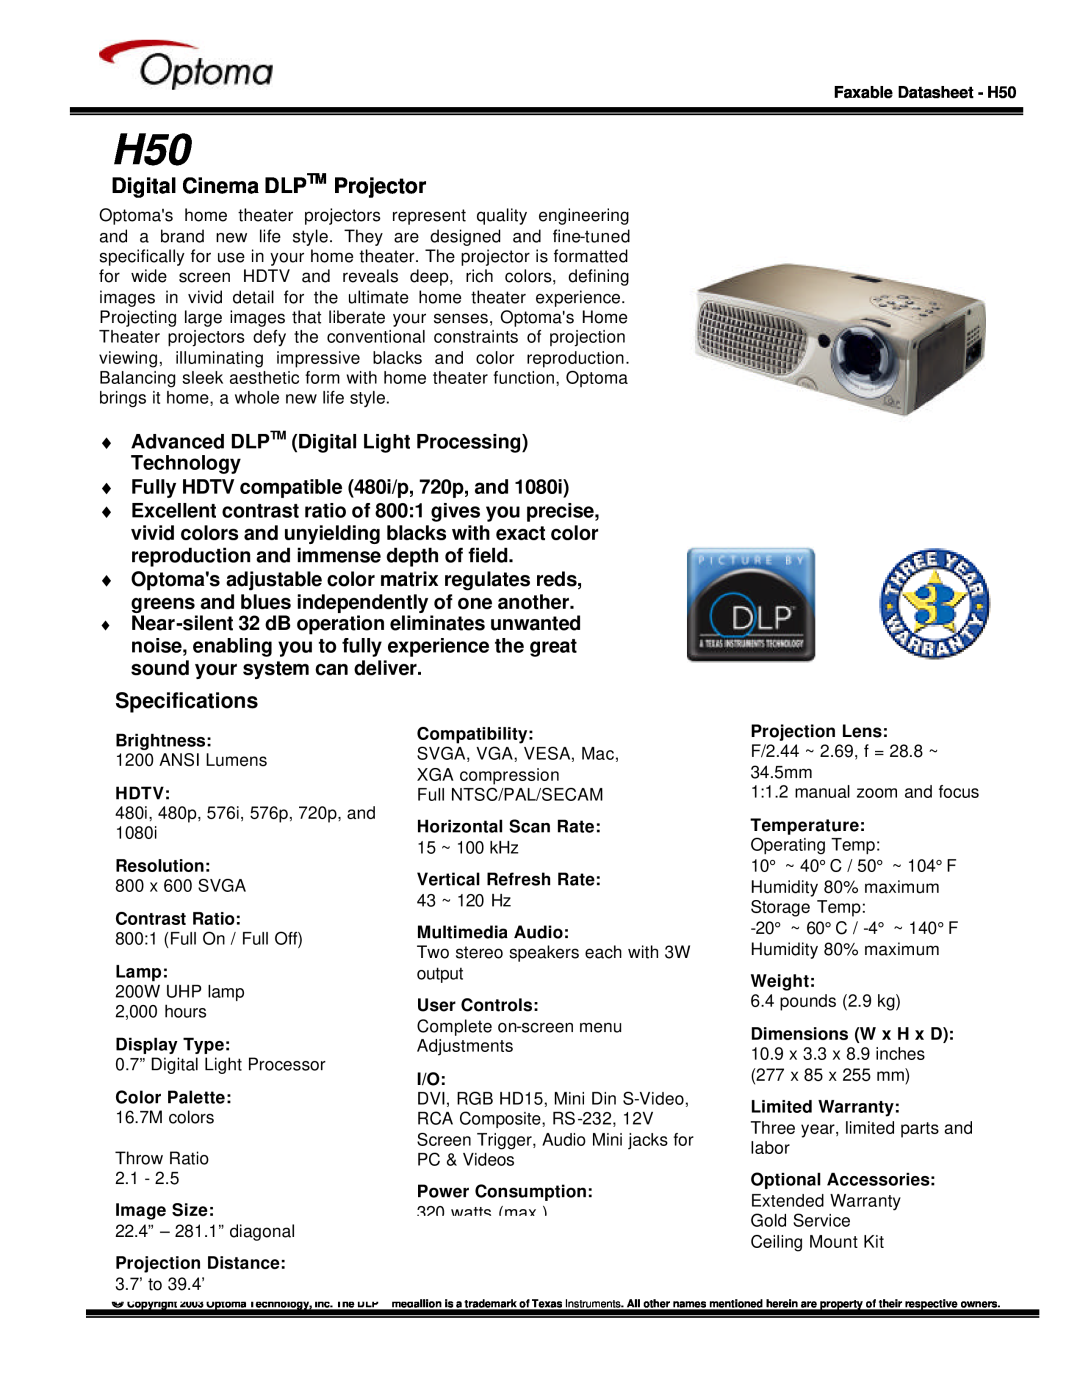 Optoma Technology H50 specifications Digital Cinema DLPTM Projector, Specifications 